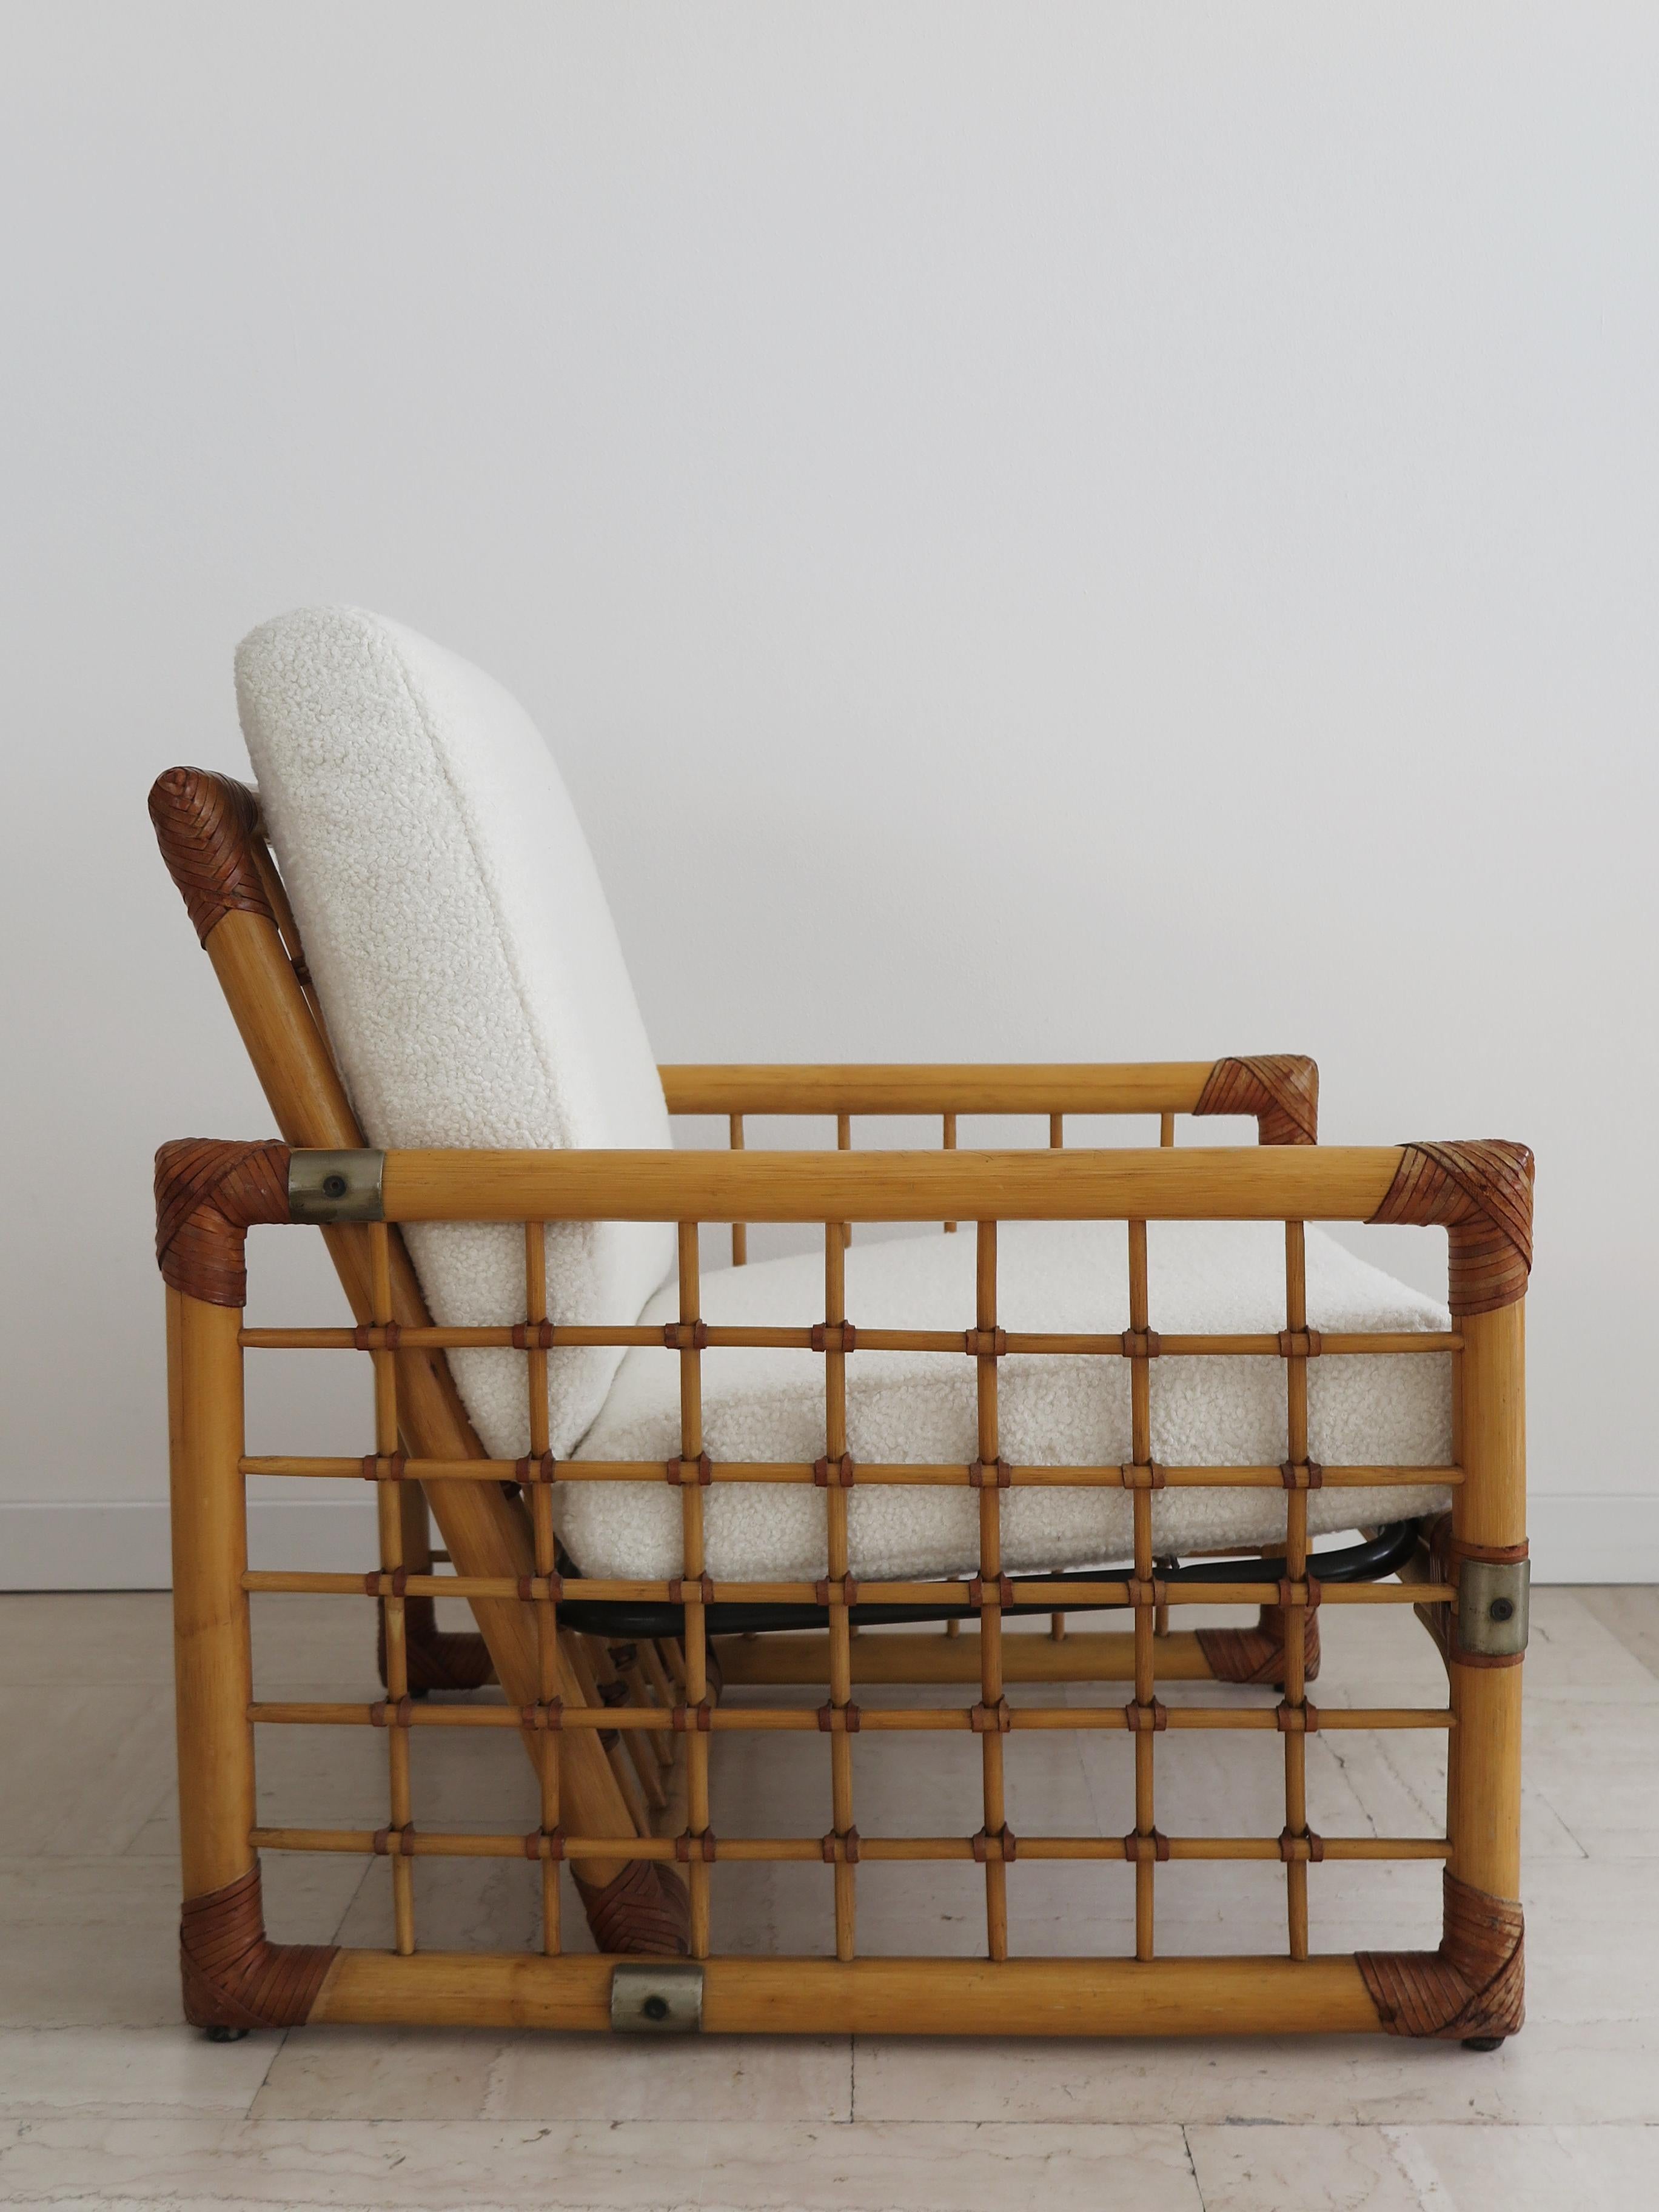 Bamboo, Indian Cane and Frabric Italian Armchairs, 1970s For Sale 1